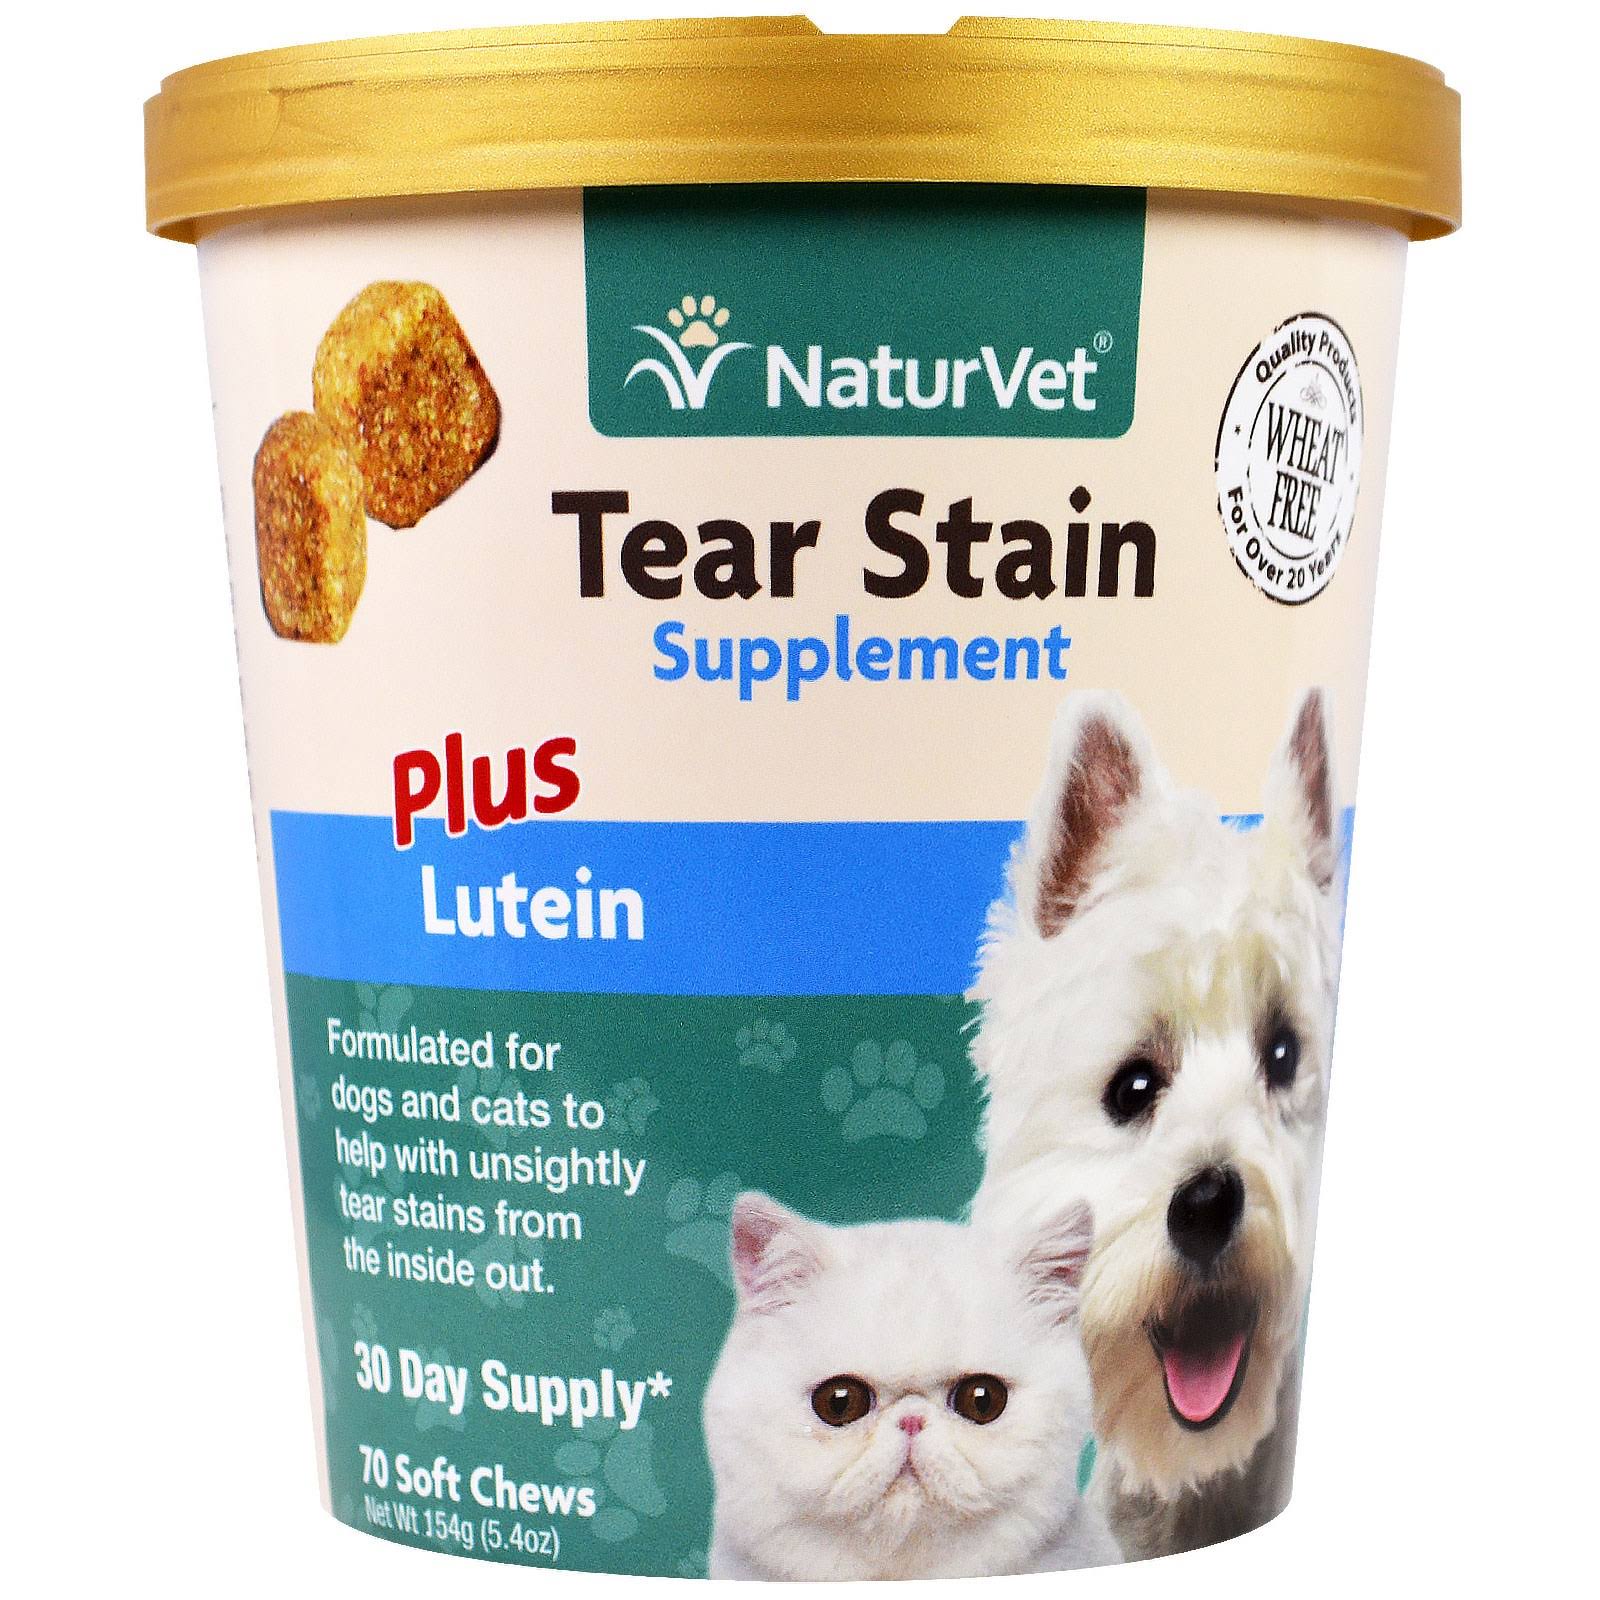 NaturVet Tear Stain Supplement Plus Lutein for Dogs & Cats - 70 Chews